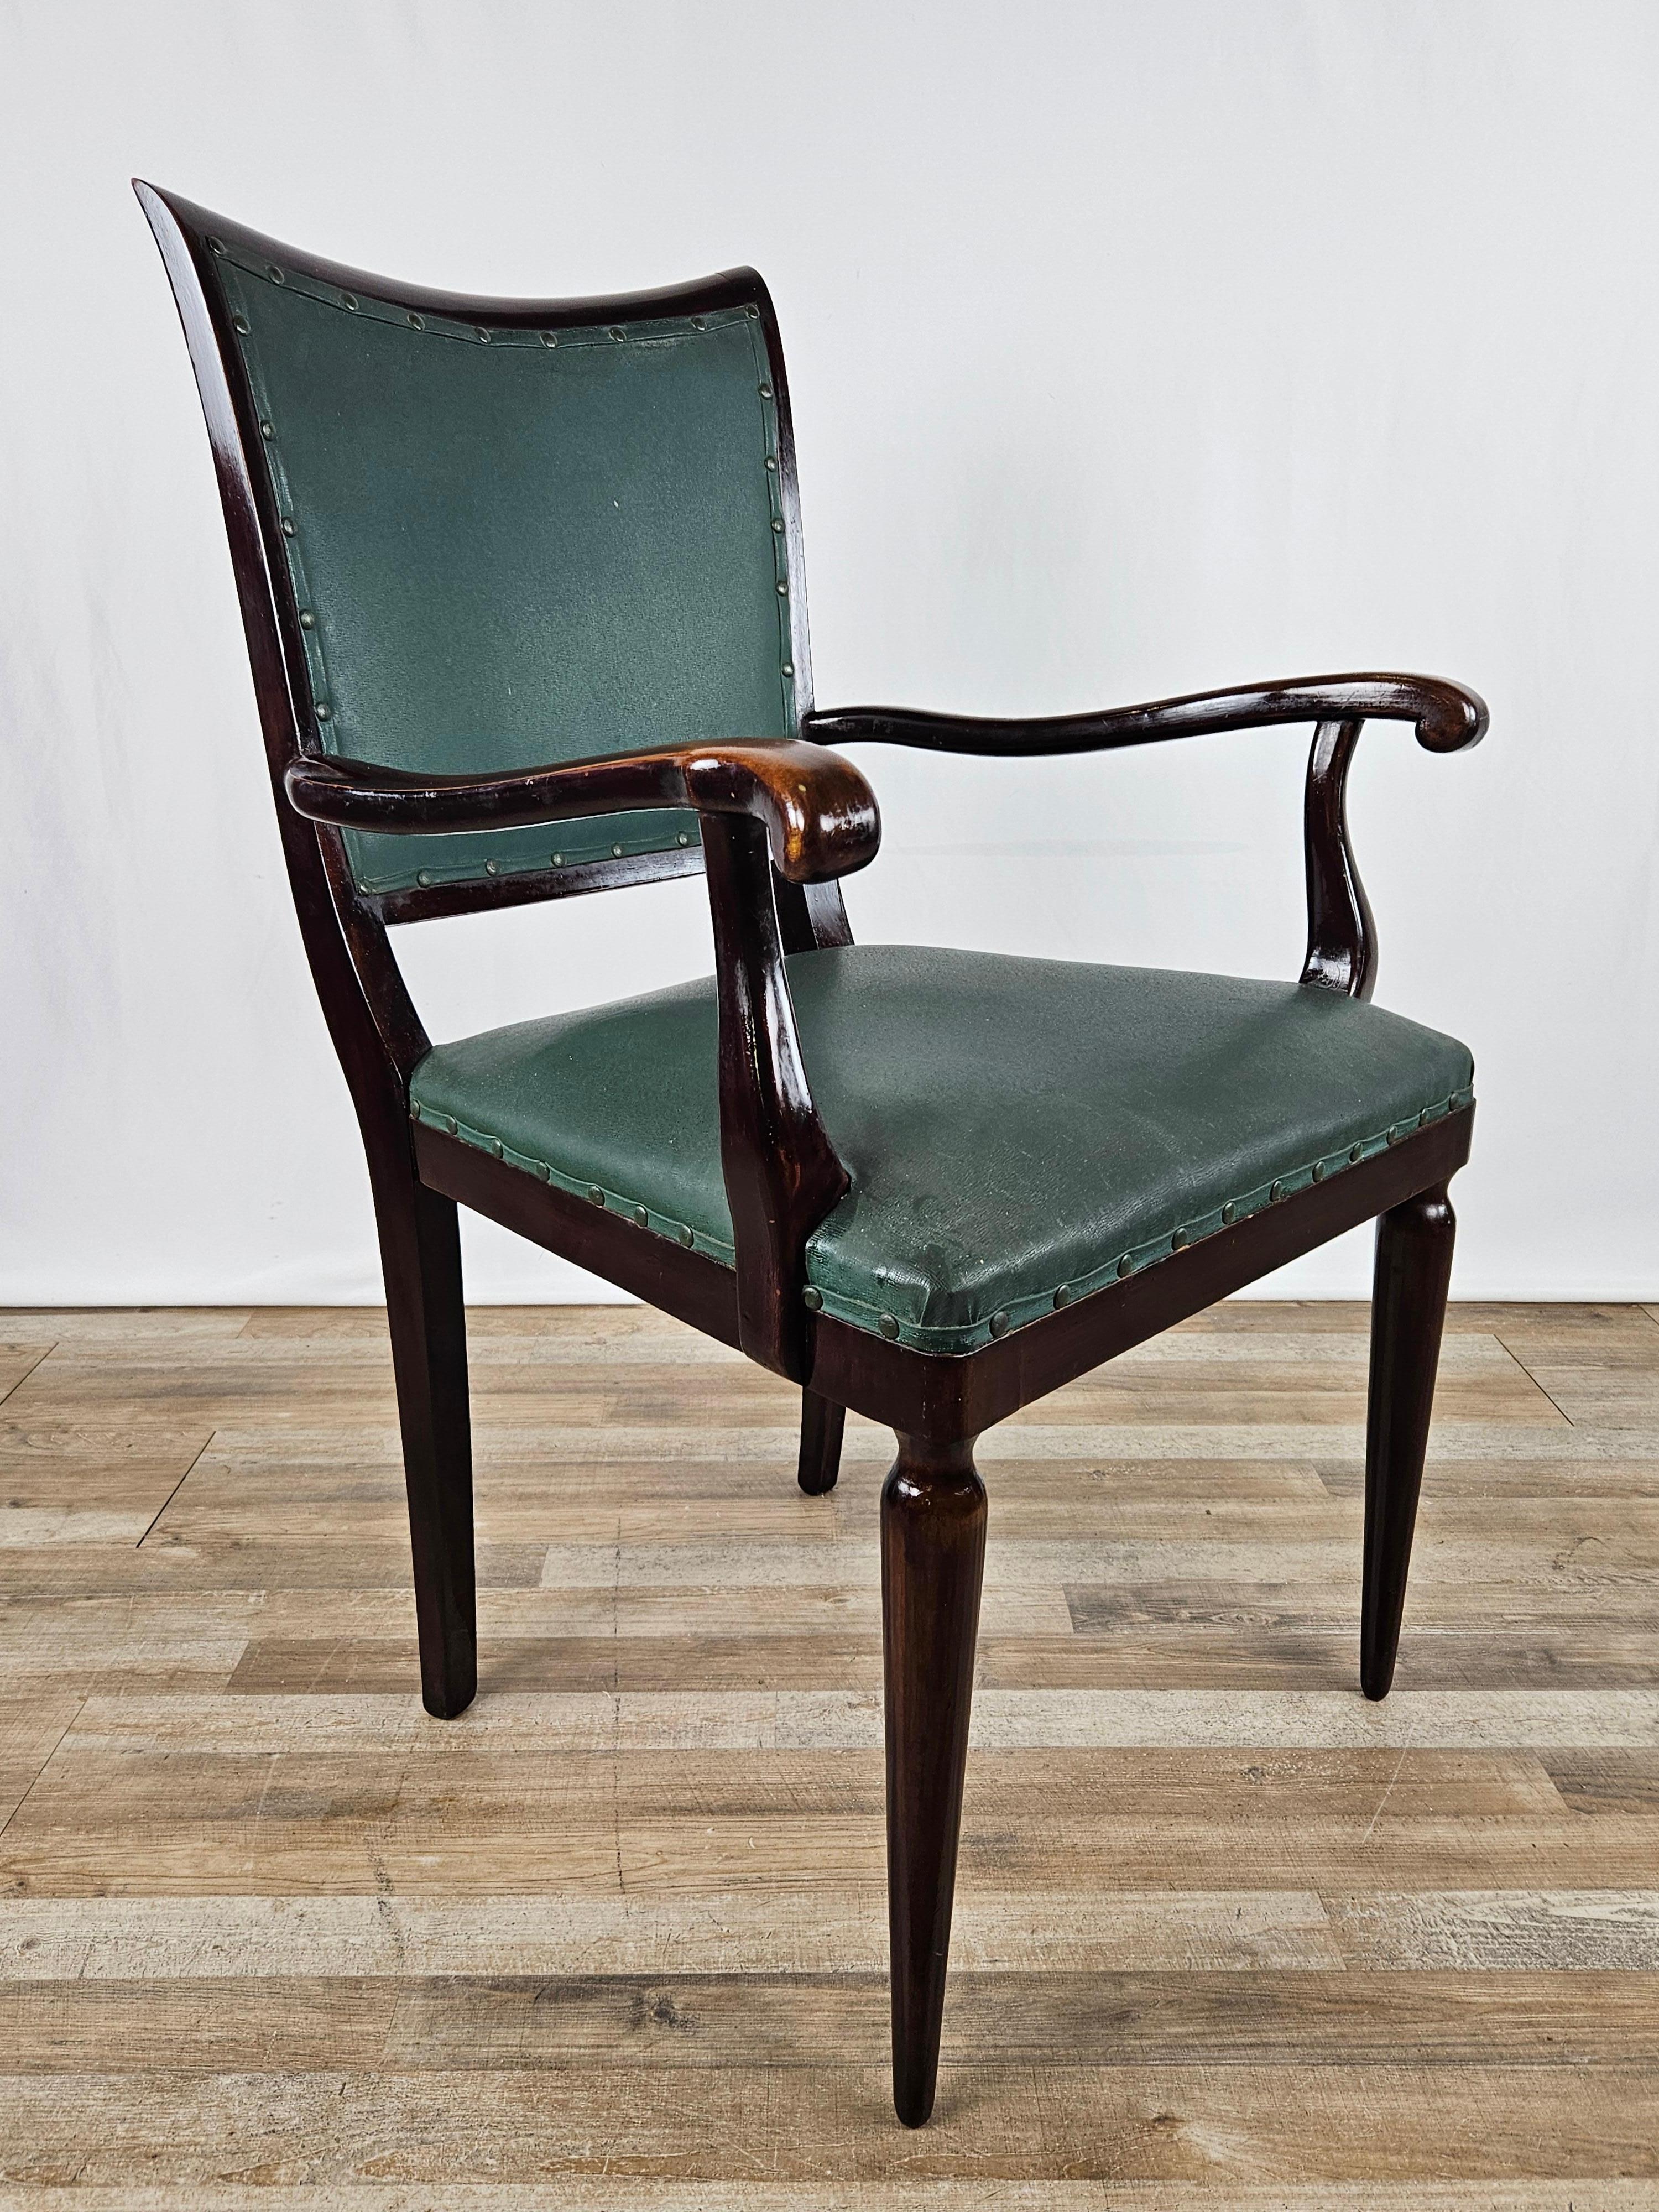 Elegant walnut study chair with upholstered back and seat in green skai decorated with perimeter studs.

Very refined chair, suitable in classy environment of all kinds from modern to antique.

The chair has been oil polished, the skai is the